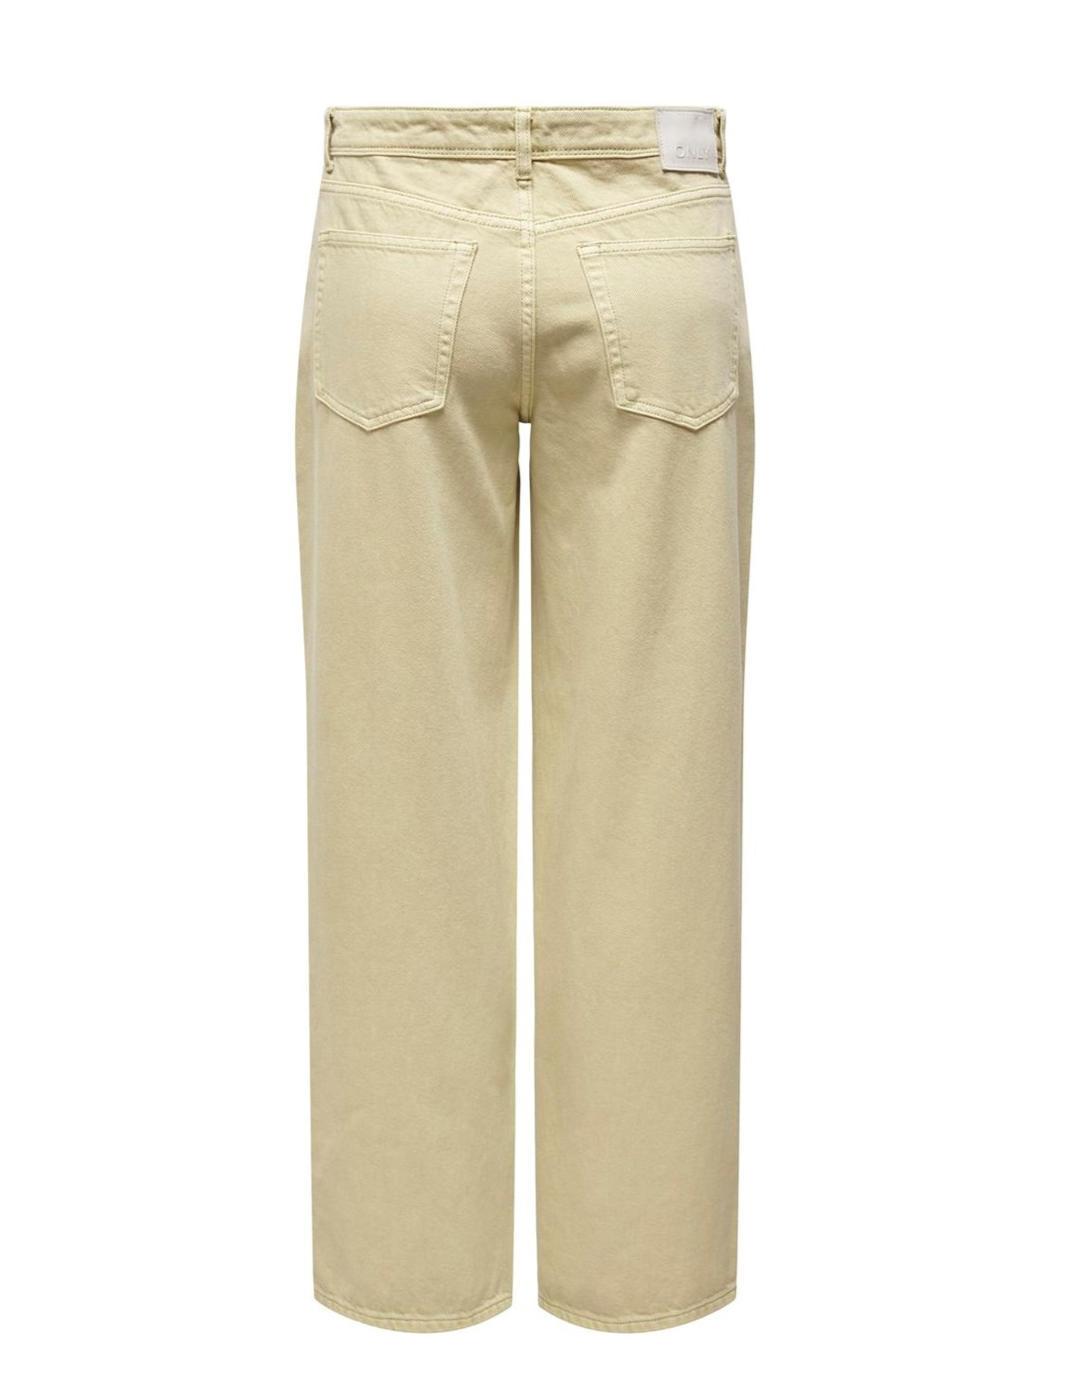 Pantalón Only Collette beige corte loose para mujer